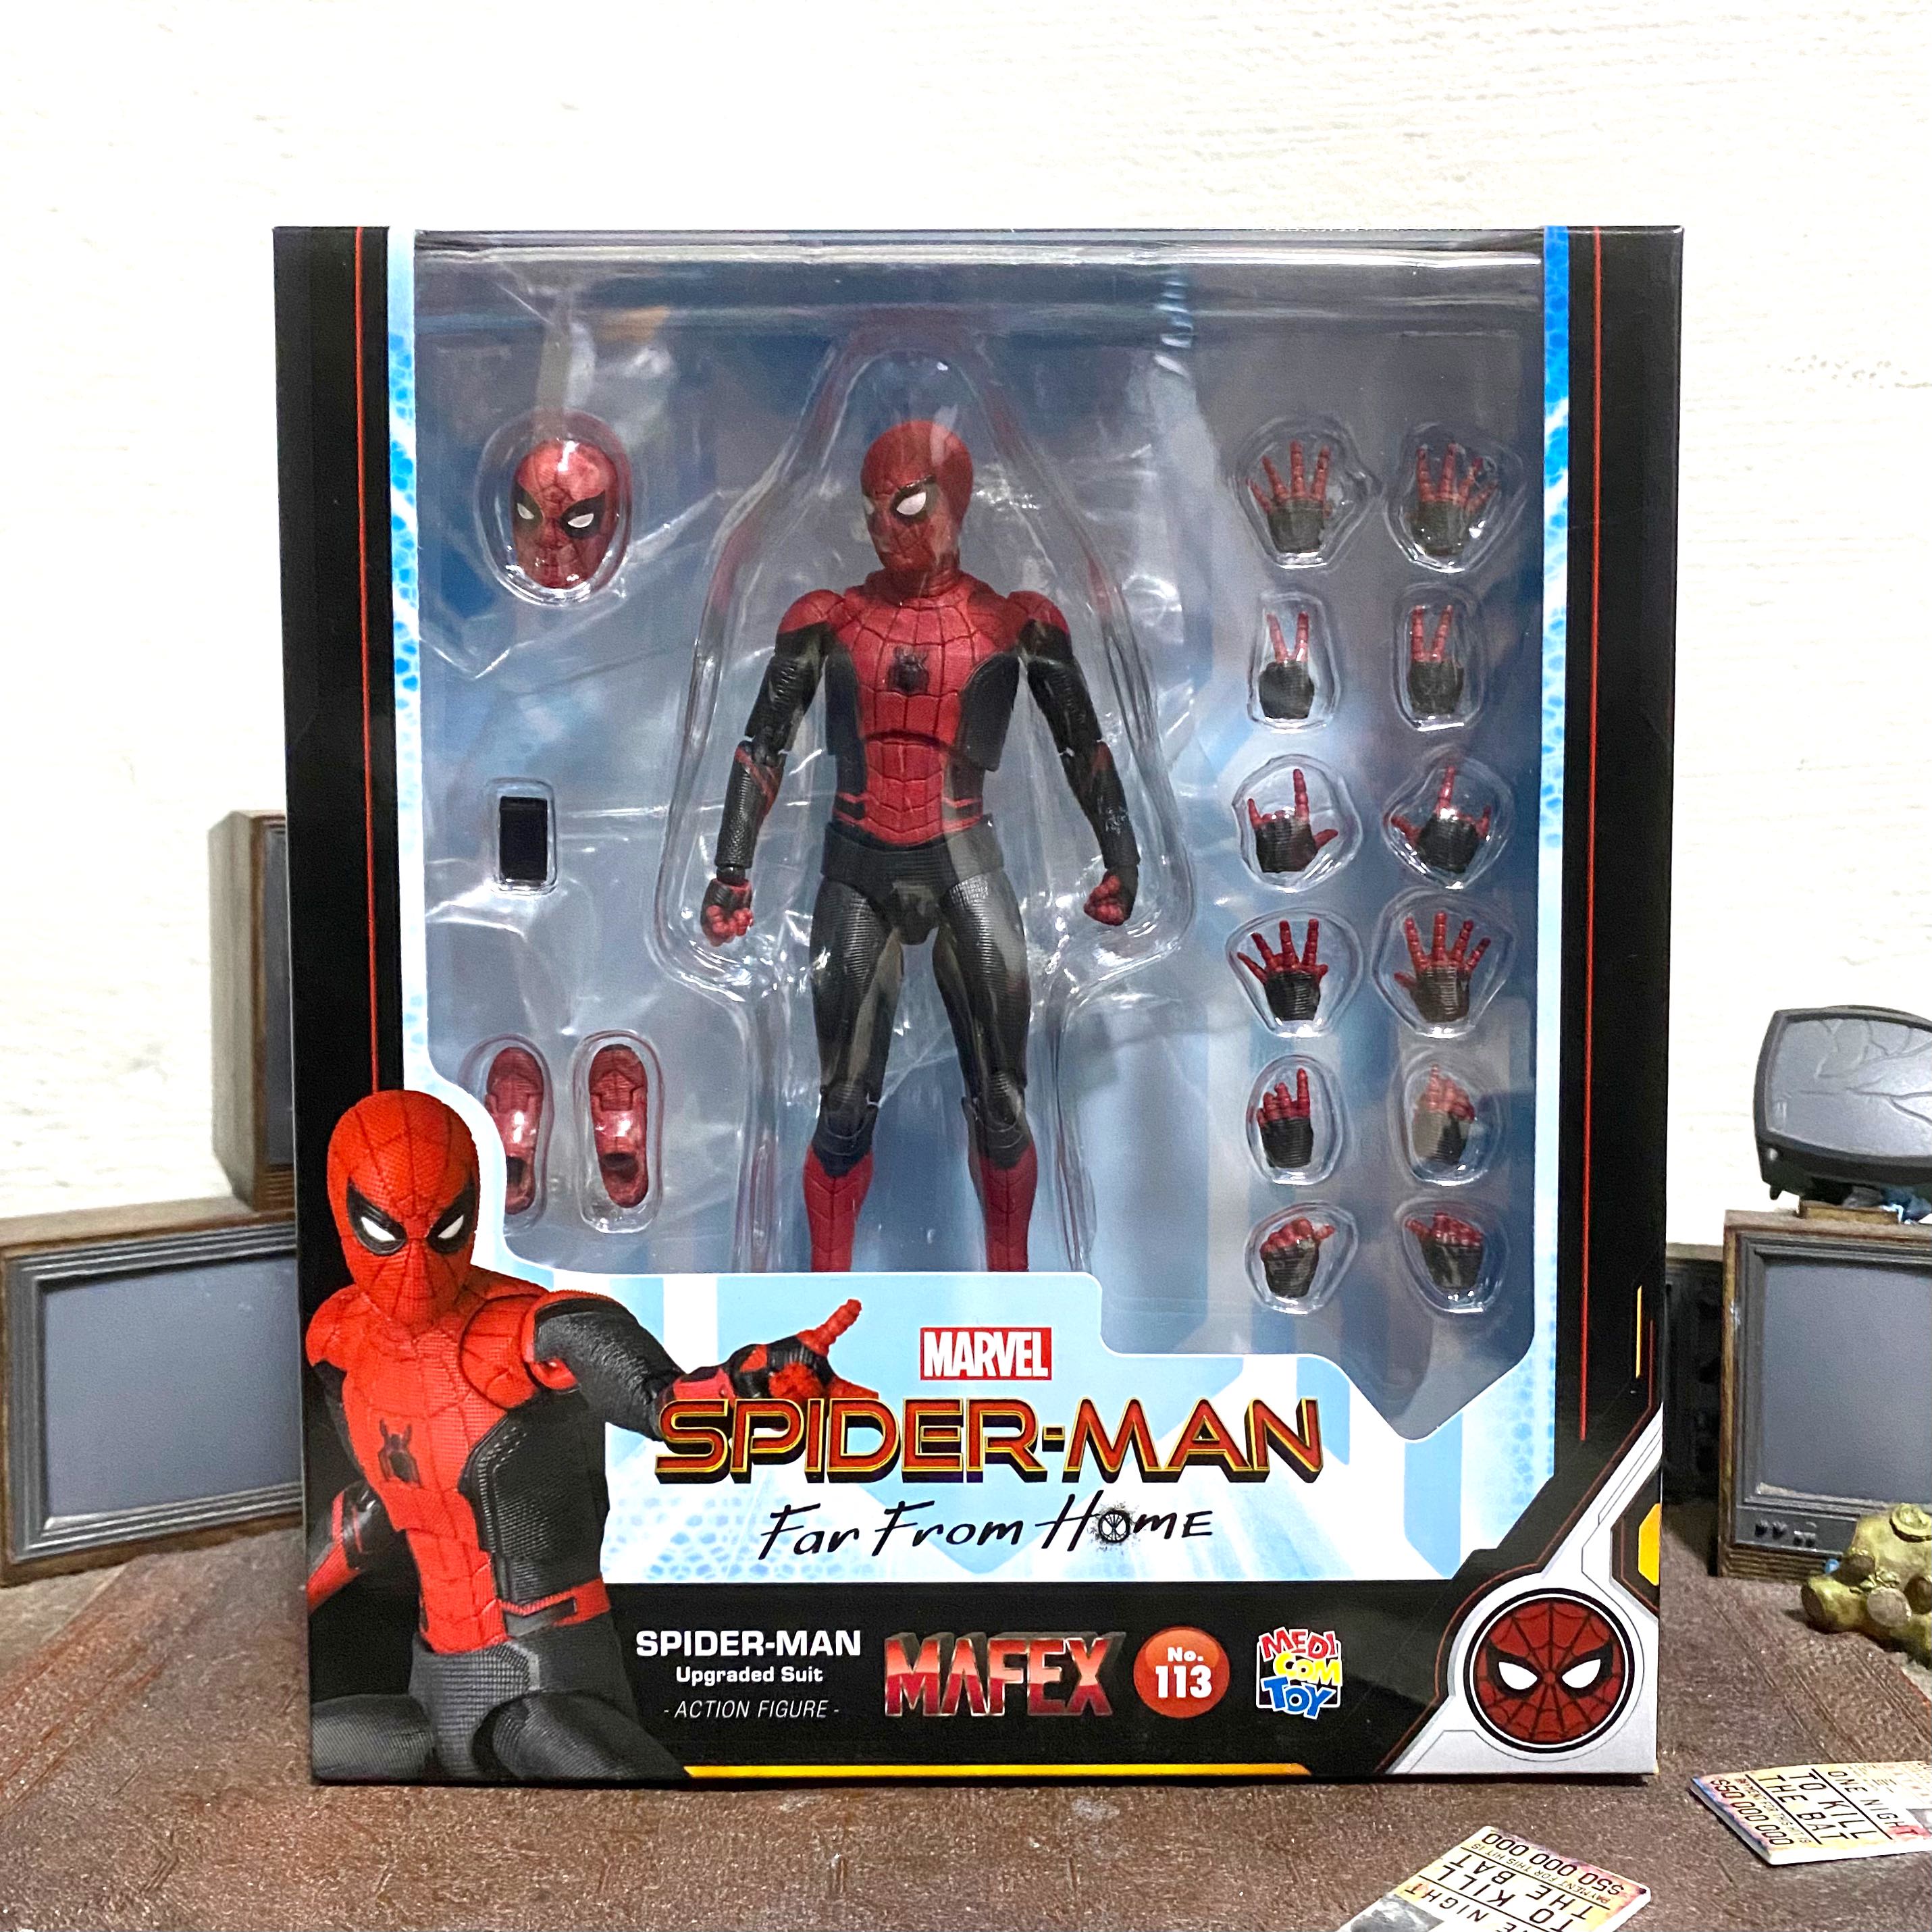 In hand] Medicom Mafex Spiderman Spider-man Upgraded Suit from No